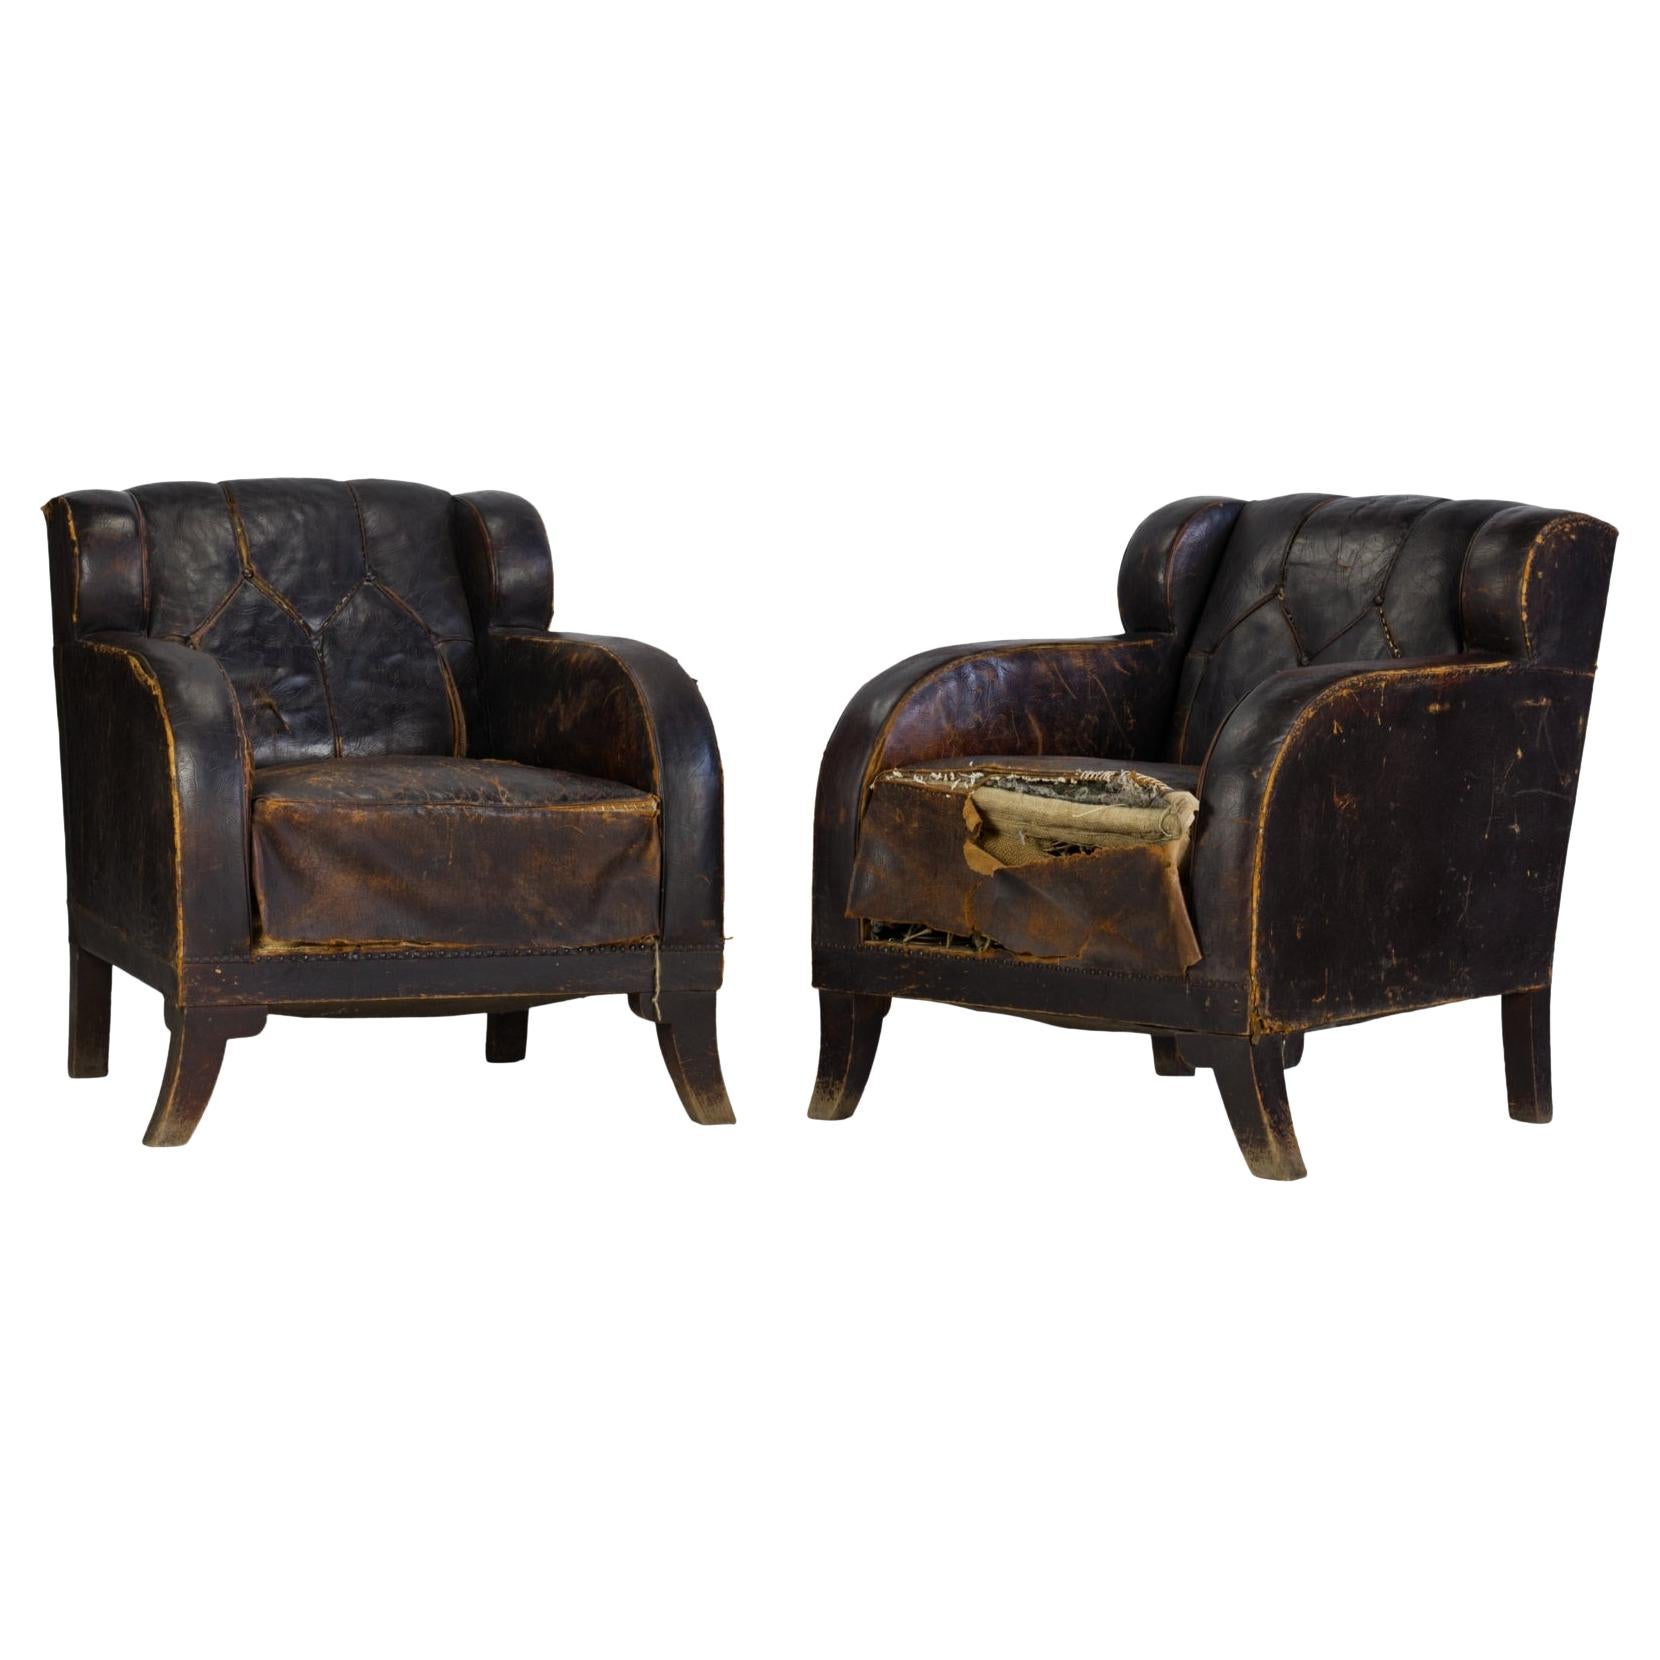 Pair of Art Nouveau Leather Club Chairs, circa 1920